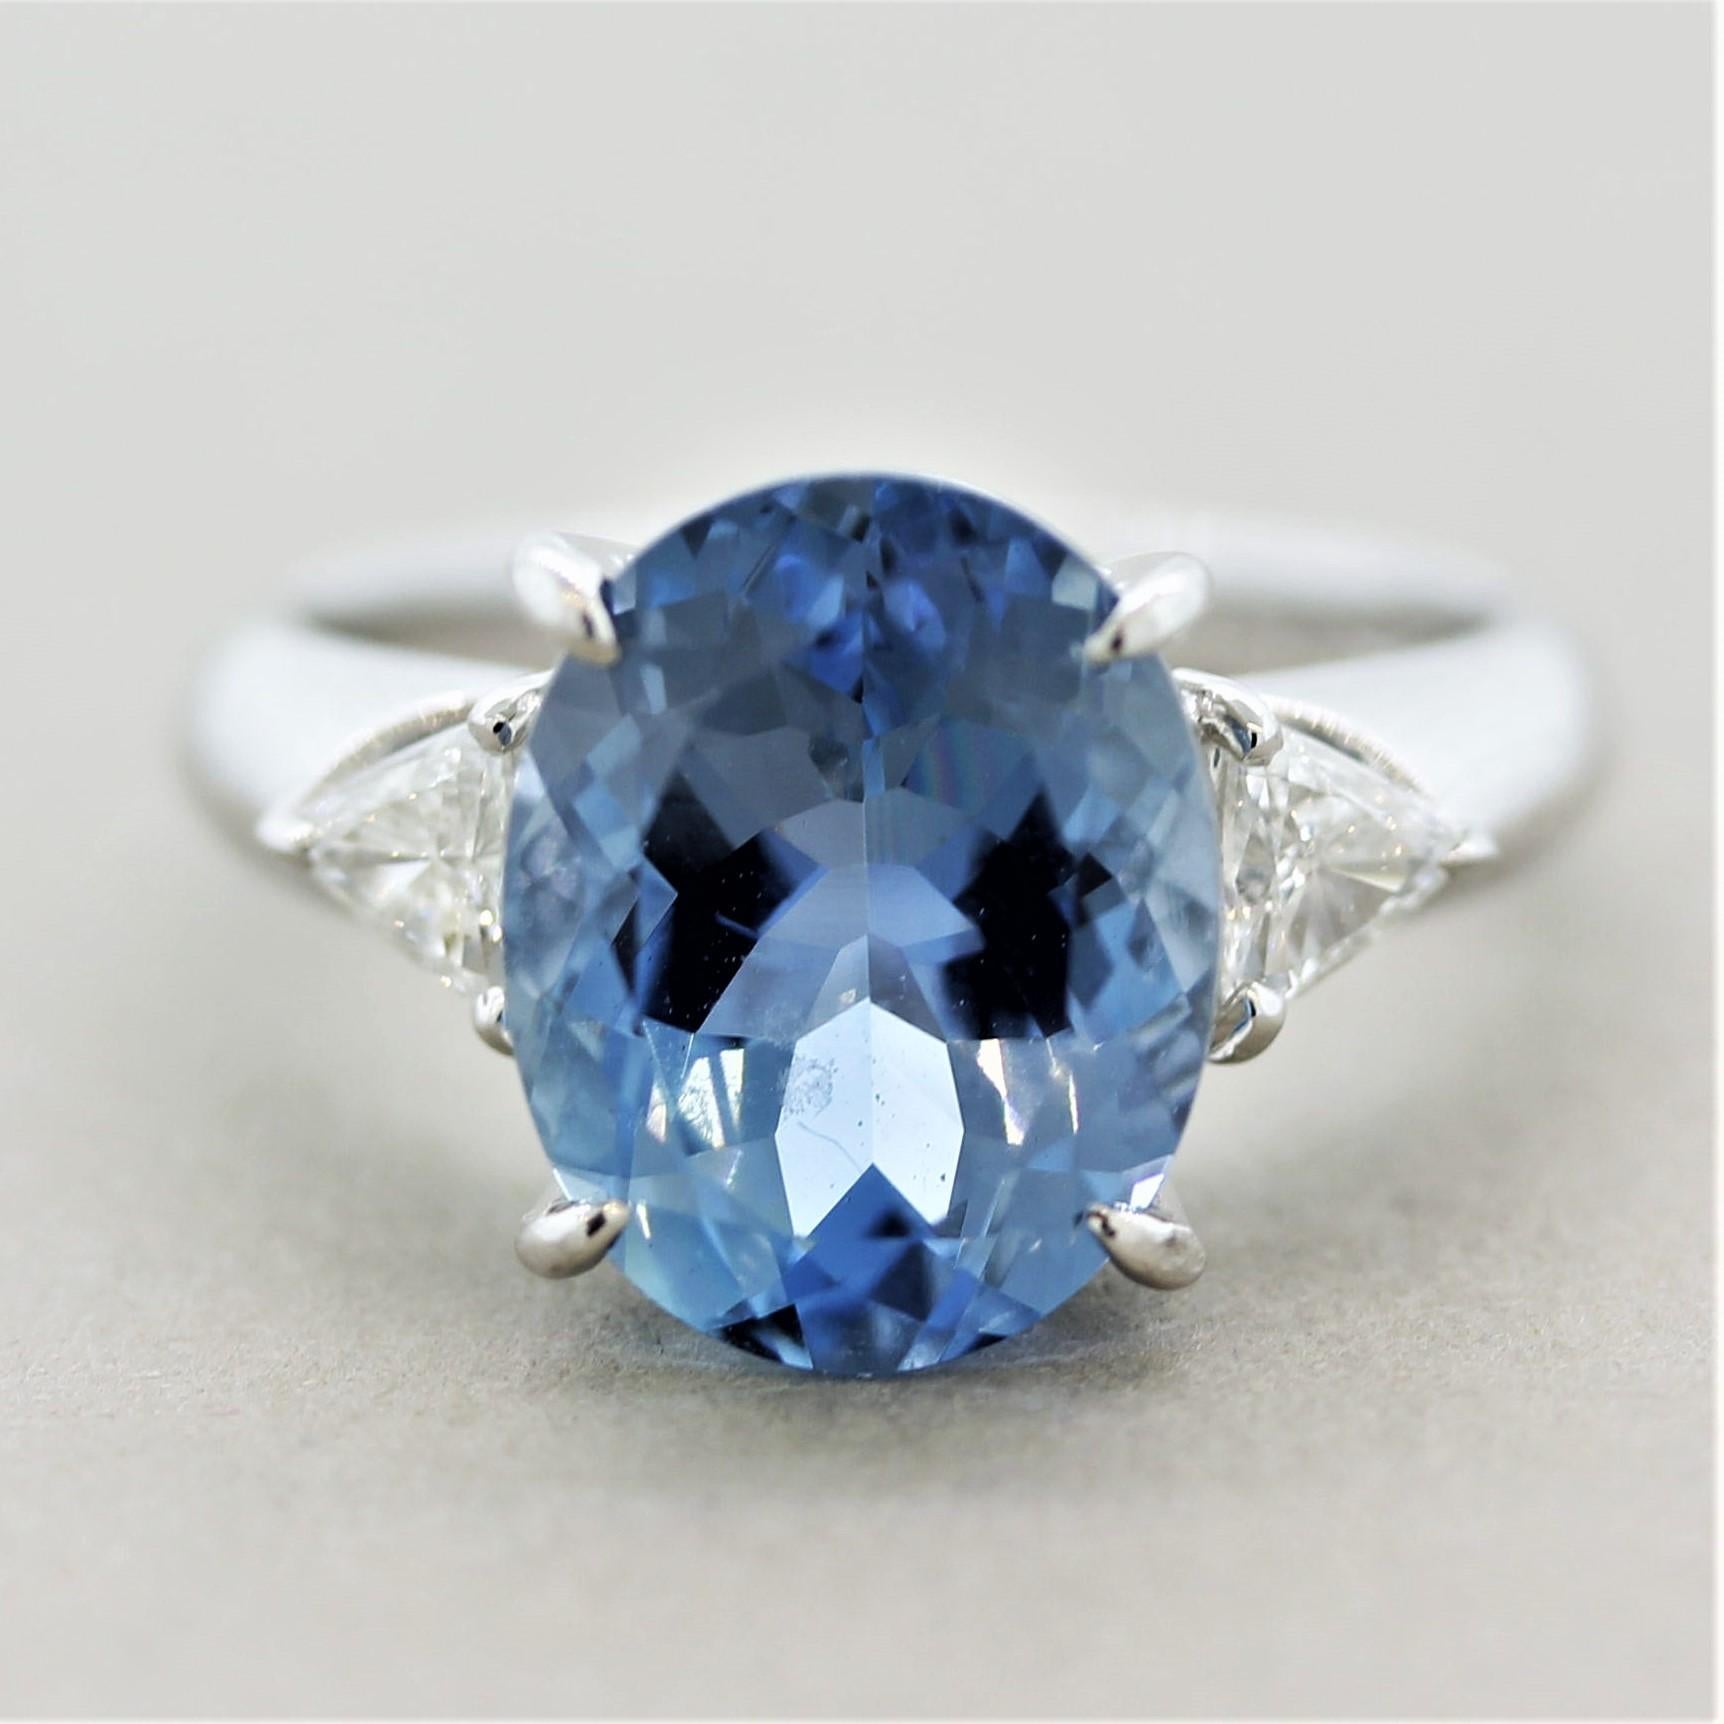 Truly one of the finest aquamarines we have seen! The gem weighs 3.69 carats and has the perfect deep sea-blue color. It is accented by 2 large trillion-cut diamonds set on its sides weighing a total of 0.21 carats. Hand-fabricated in platinum and